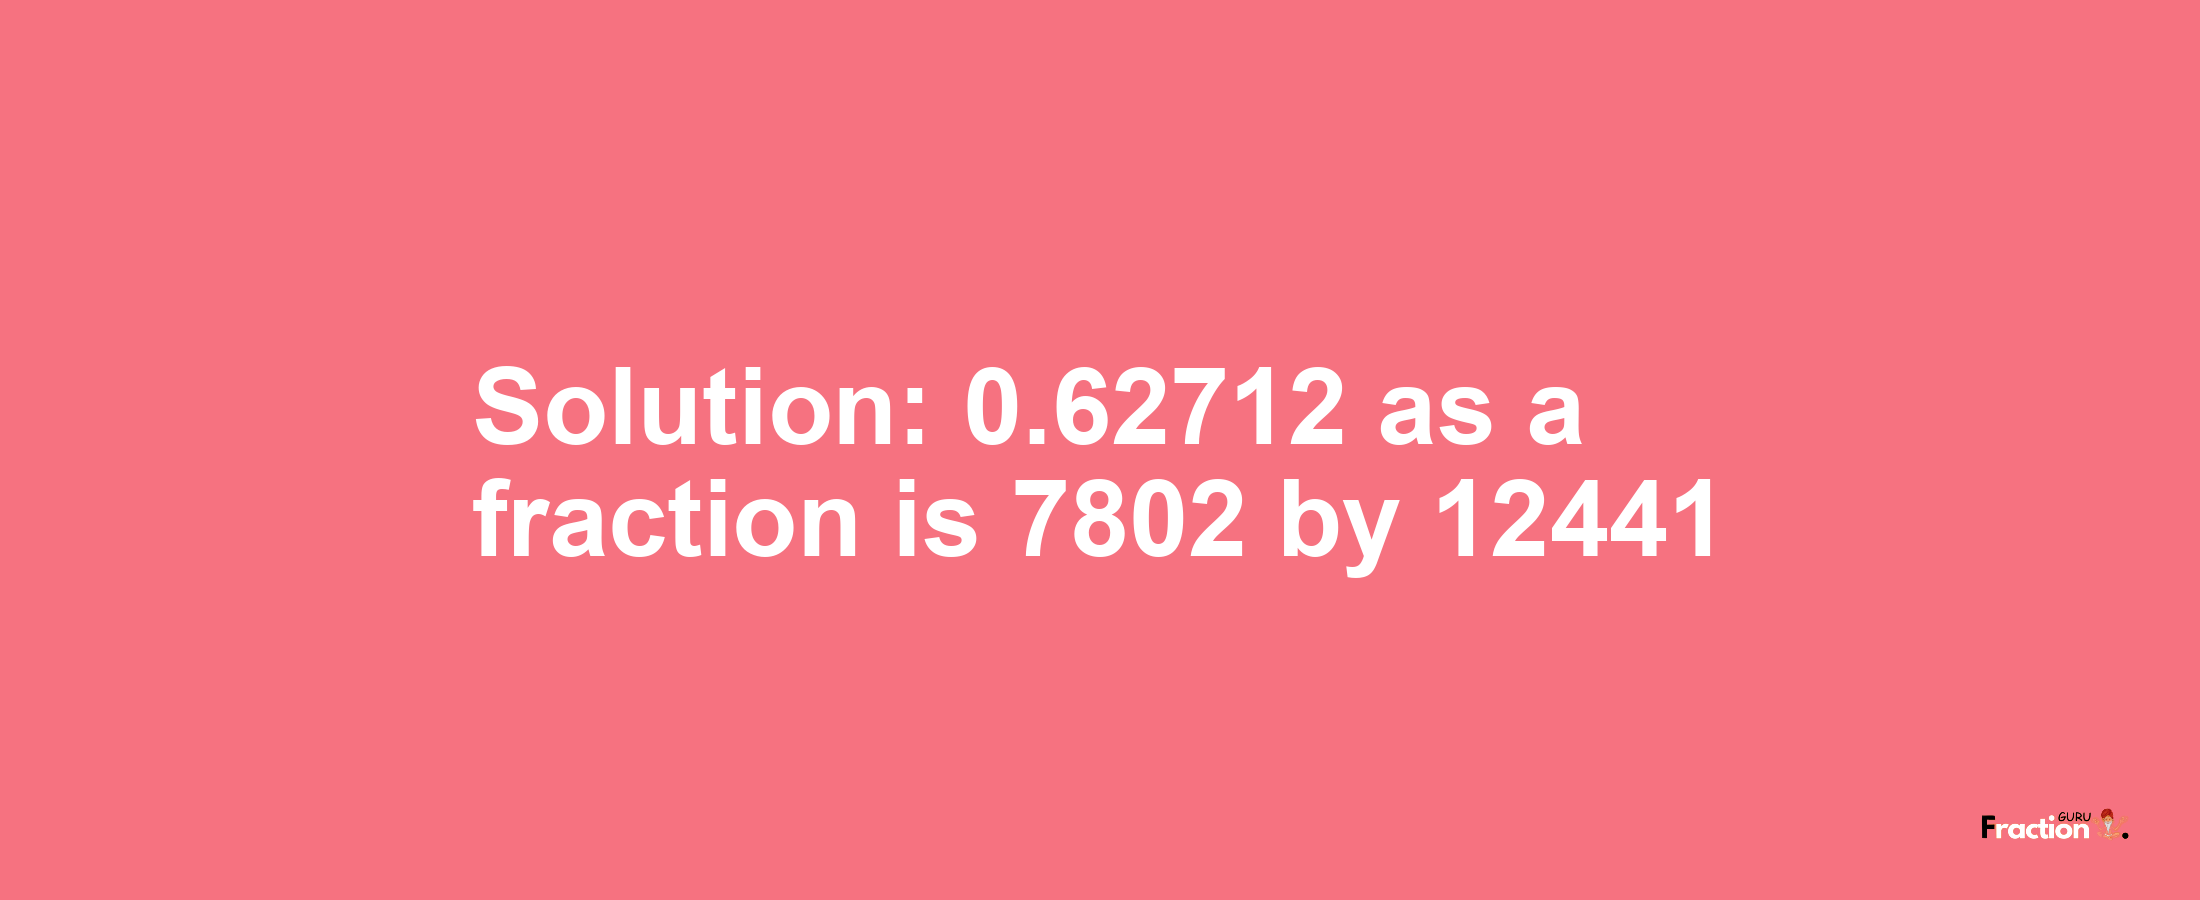 Solution:0.62712 as a fraction is 7802/12441